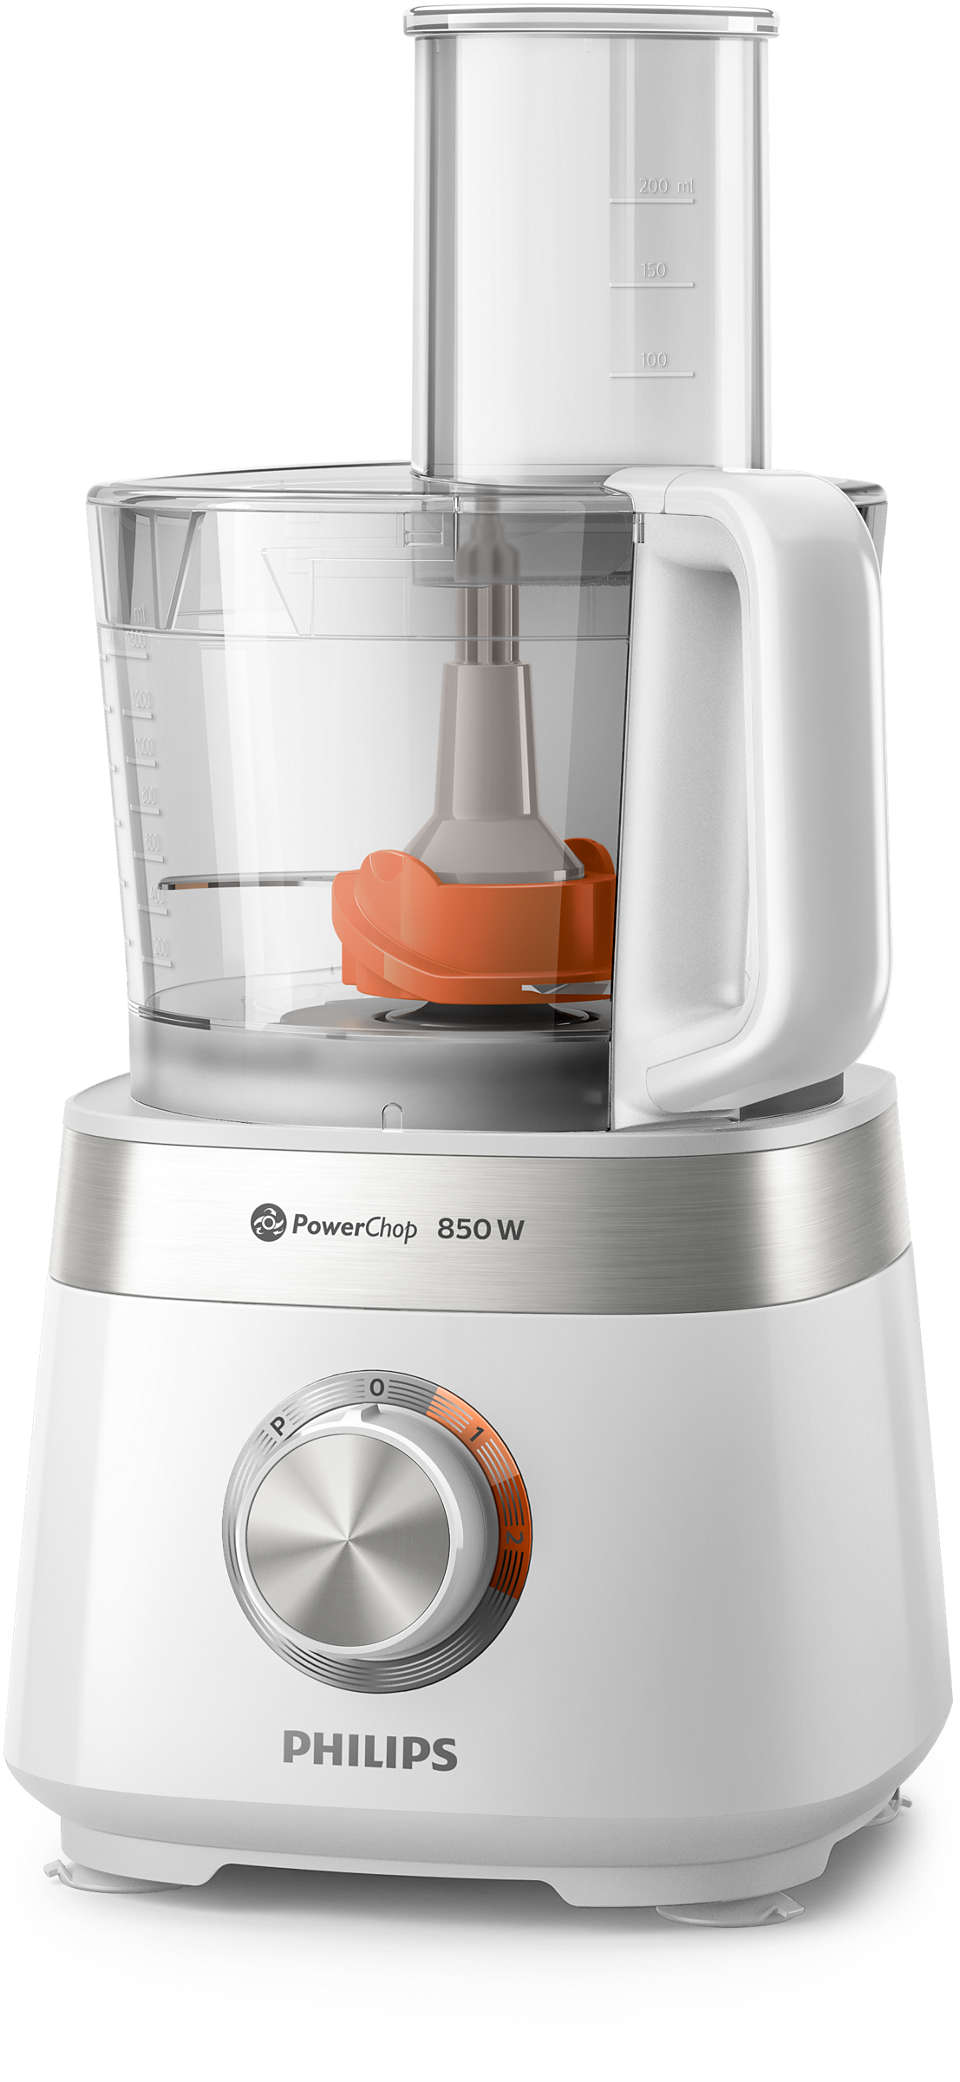 Philips Viva CollectionCompact Food Processor